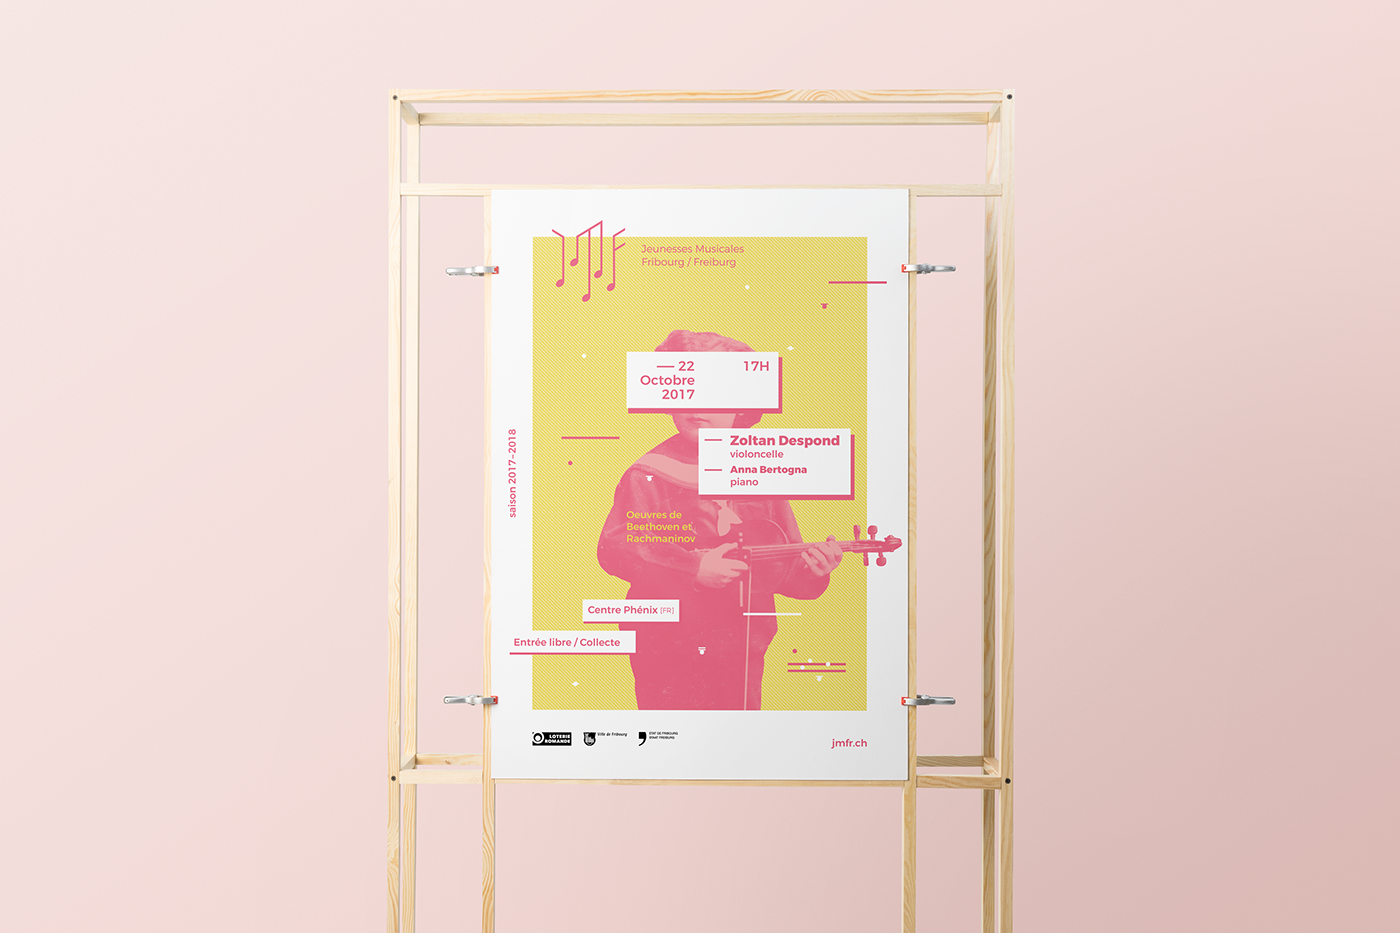 jmf music youth Jeune Musical Fribourg poster vintage pink branding 